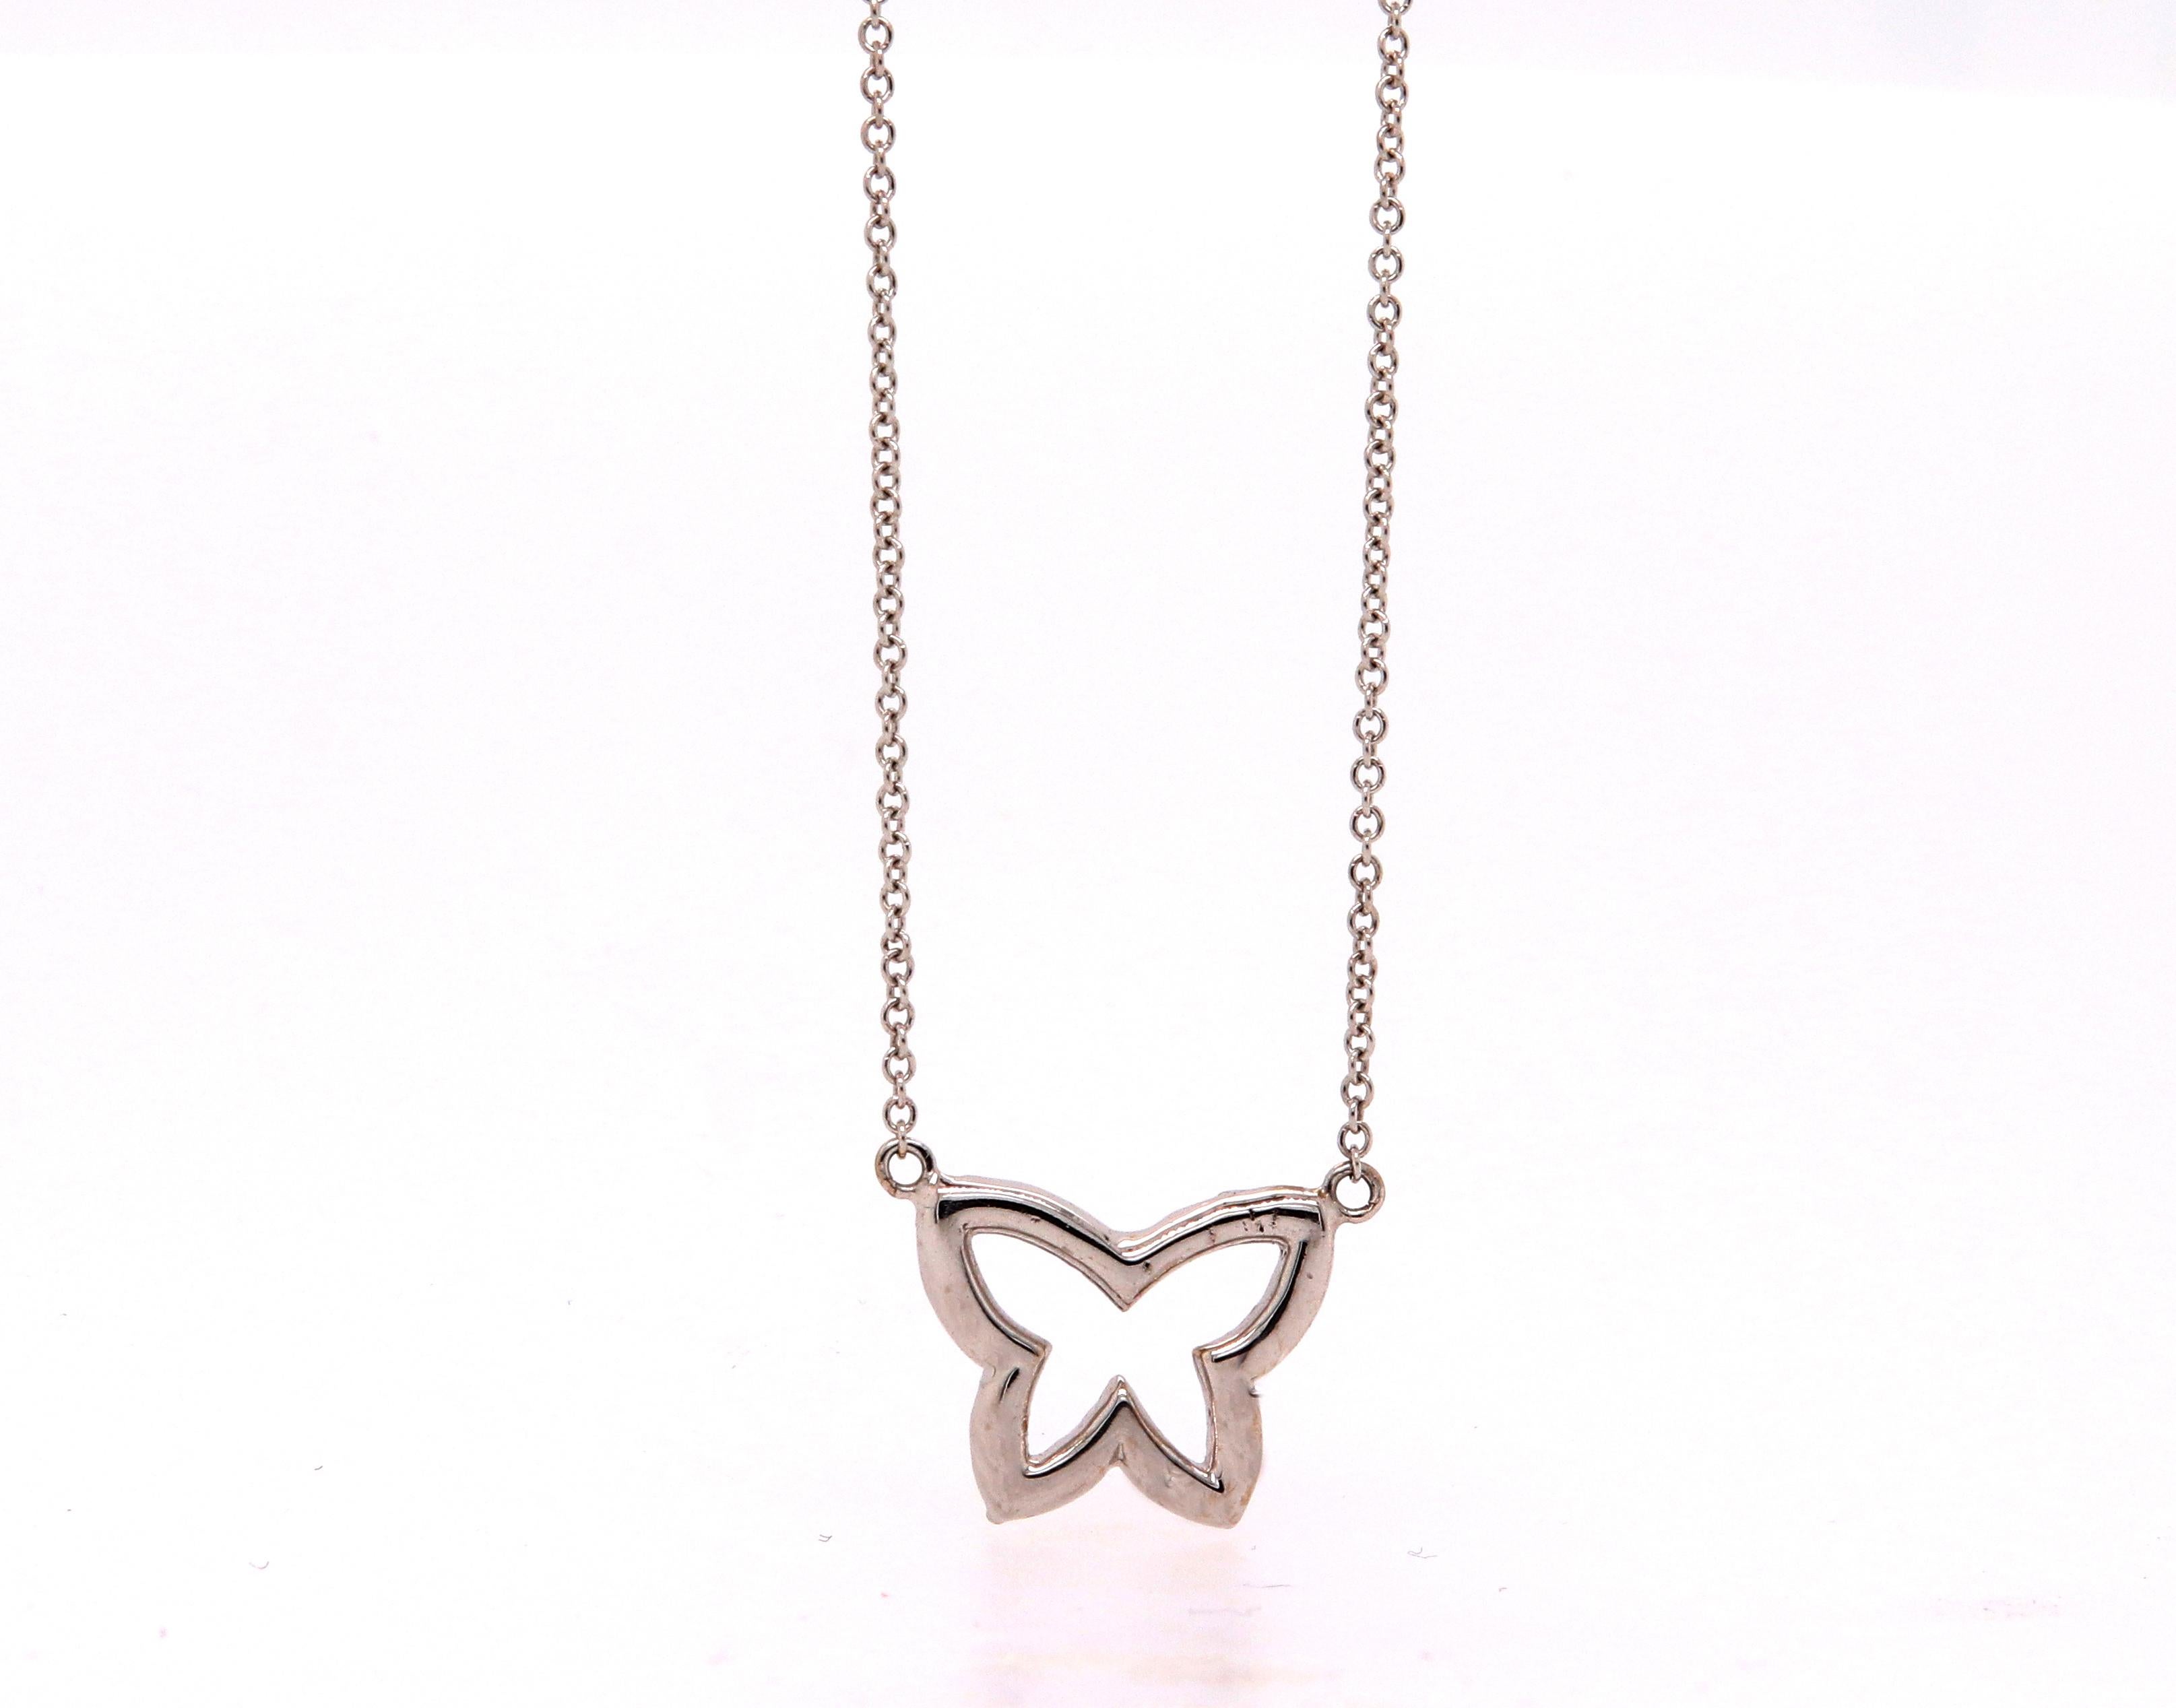 Contemporary Butterfly Shaped Round Diamond Pendant Necklace 14k White Gold Motif Animal For Sale